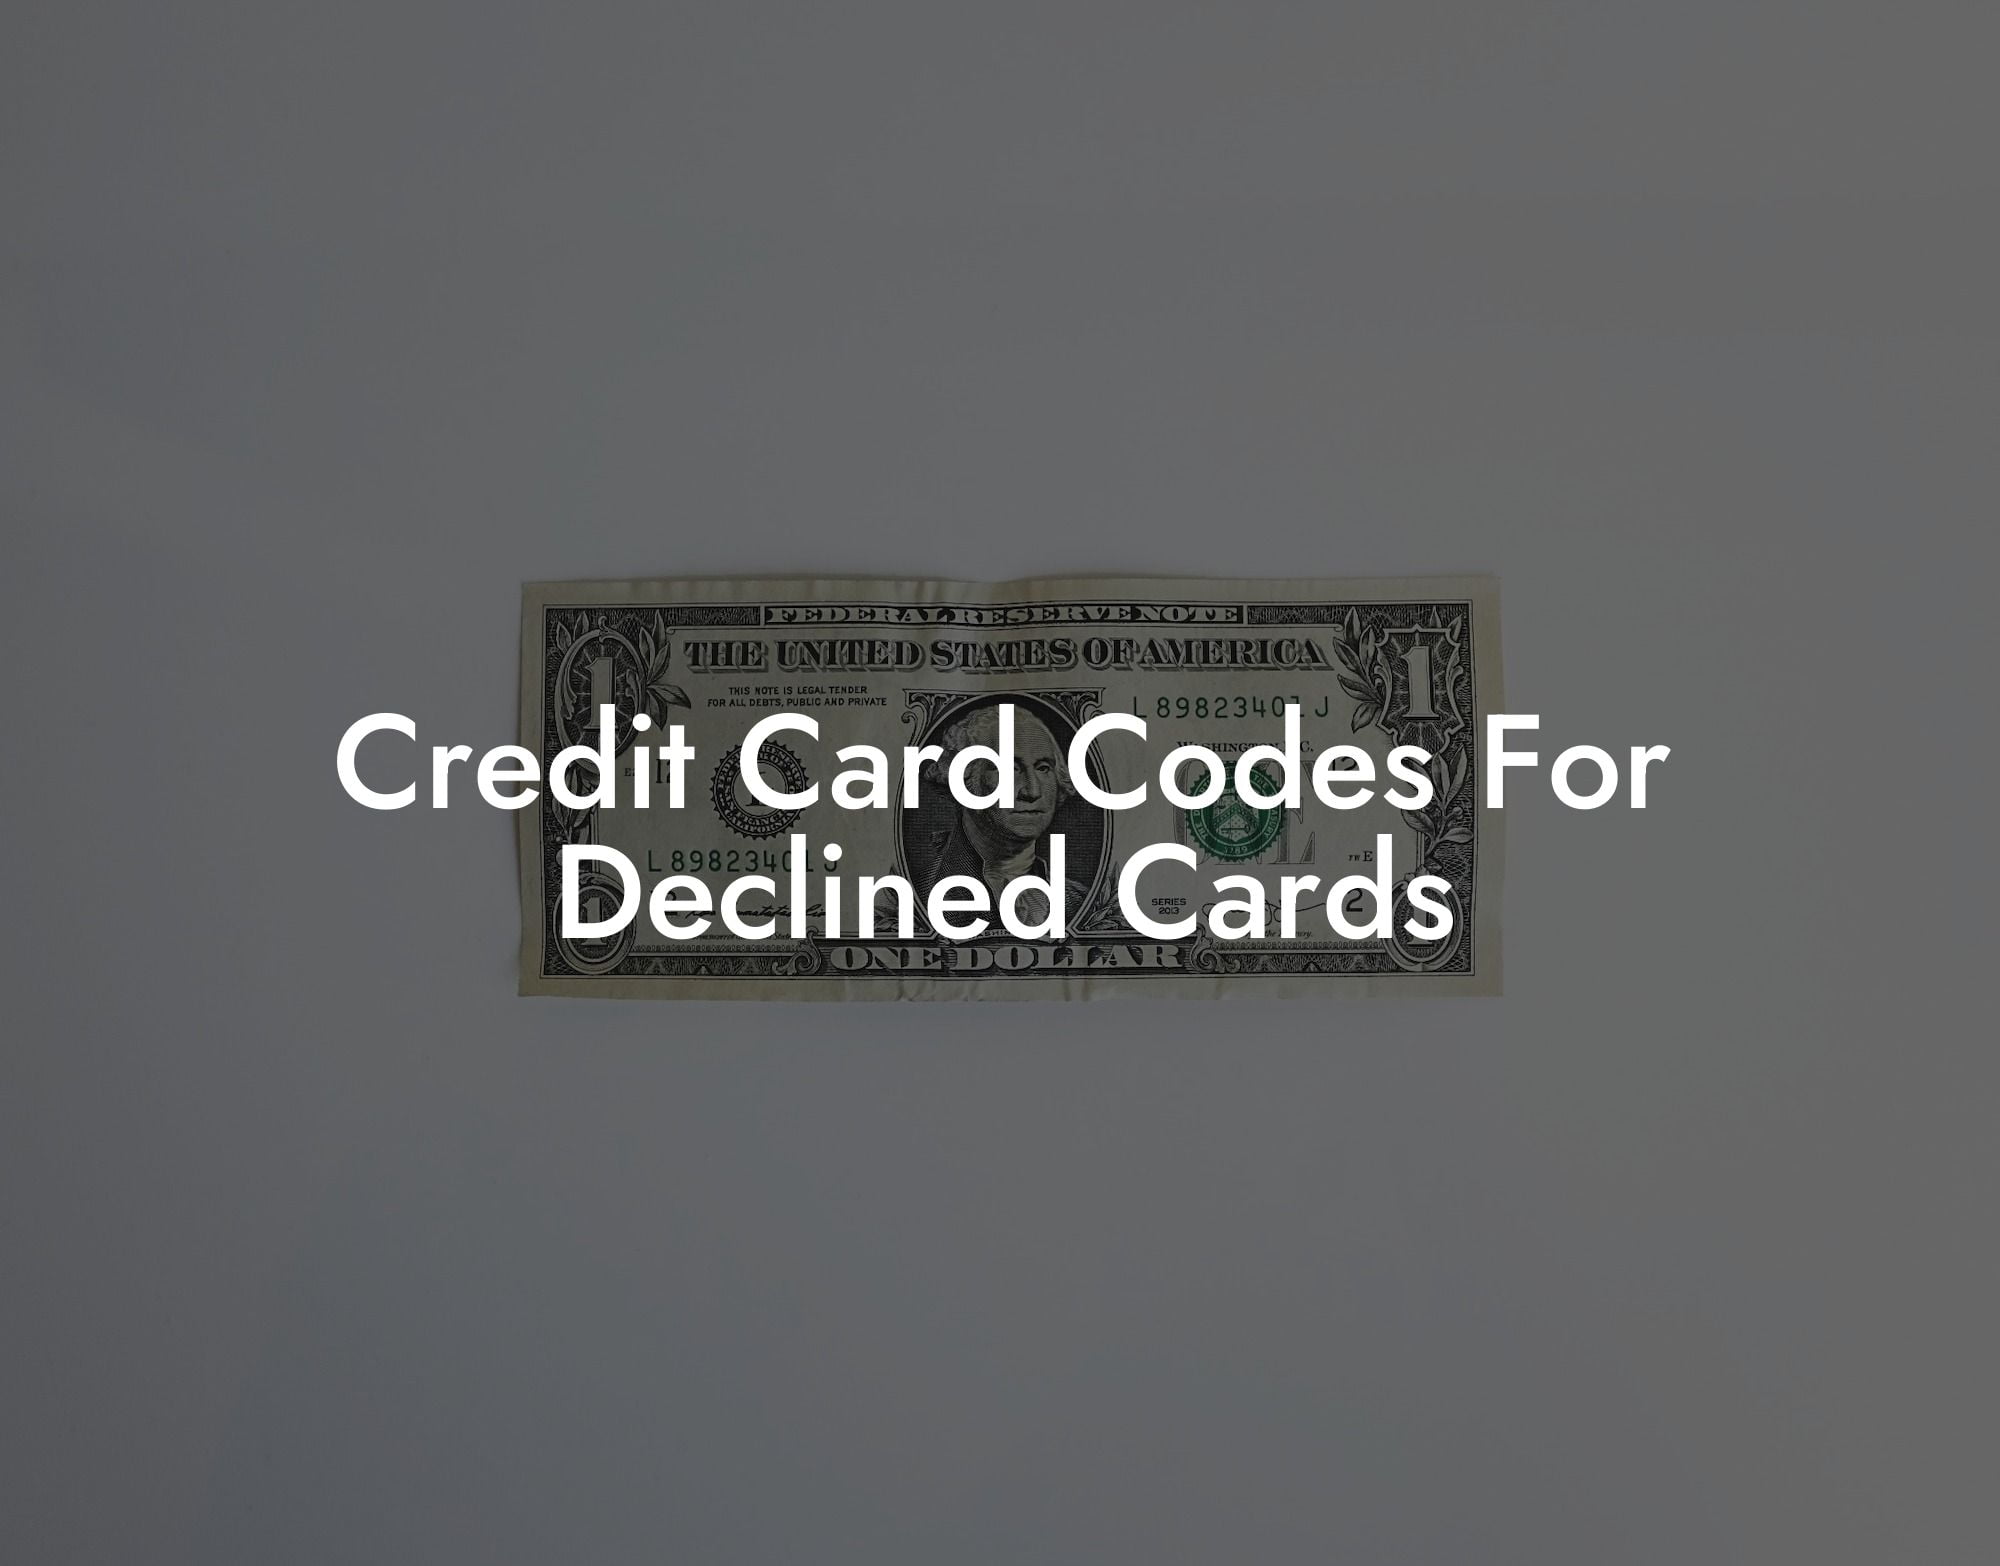 Credit Card Codes For Declined Cards